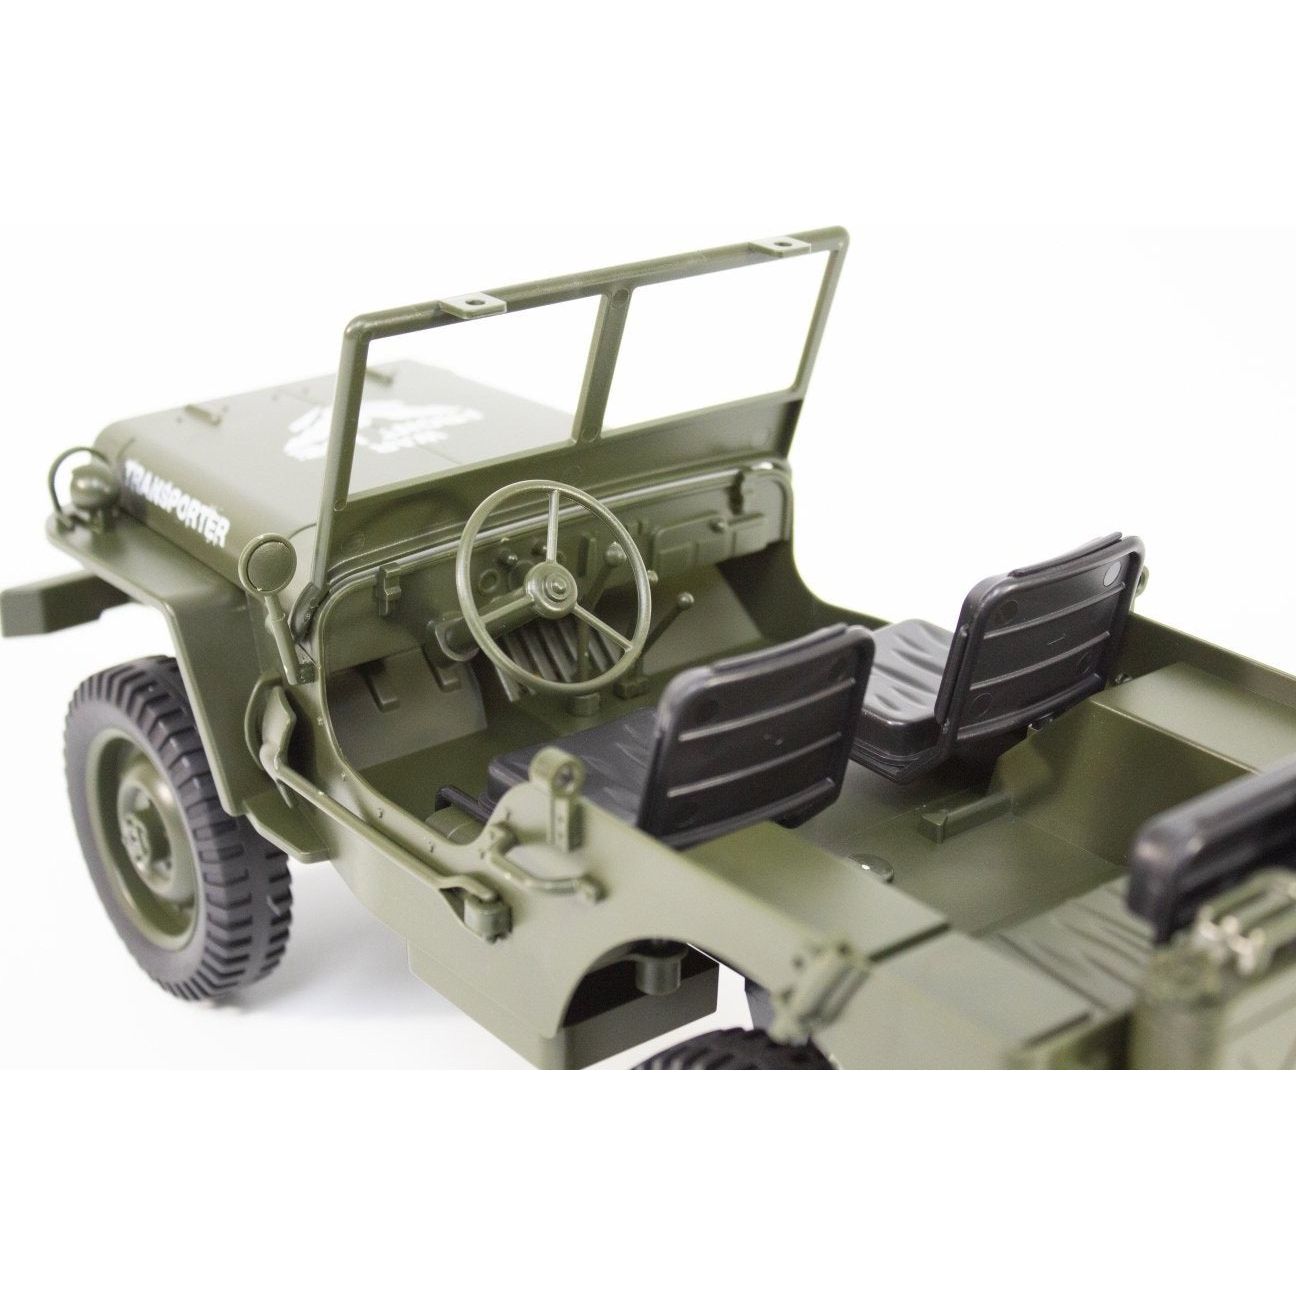 Willys 4x4 1:10th Scale RTR 2.4GHz RC Truck